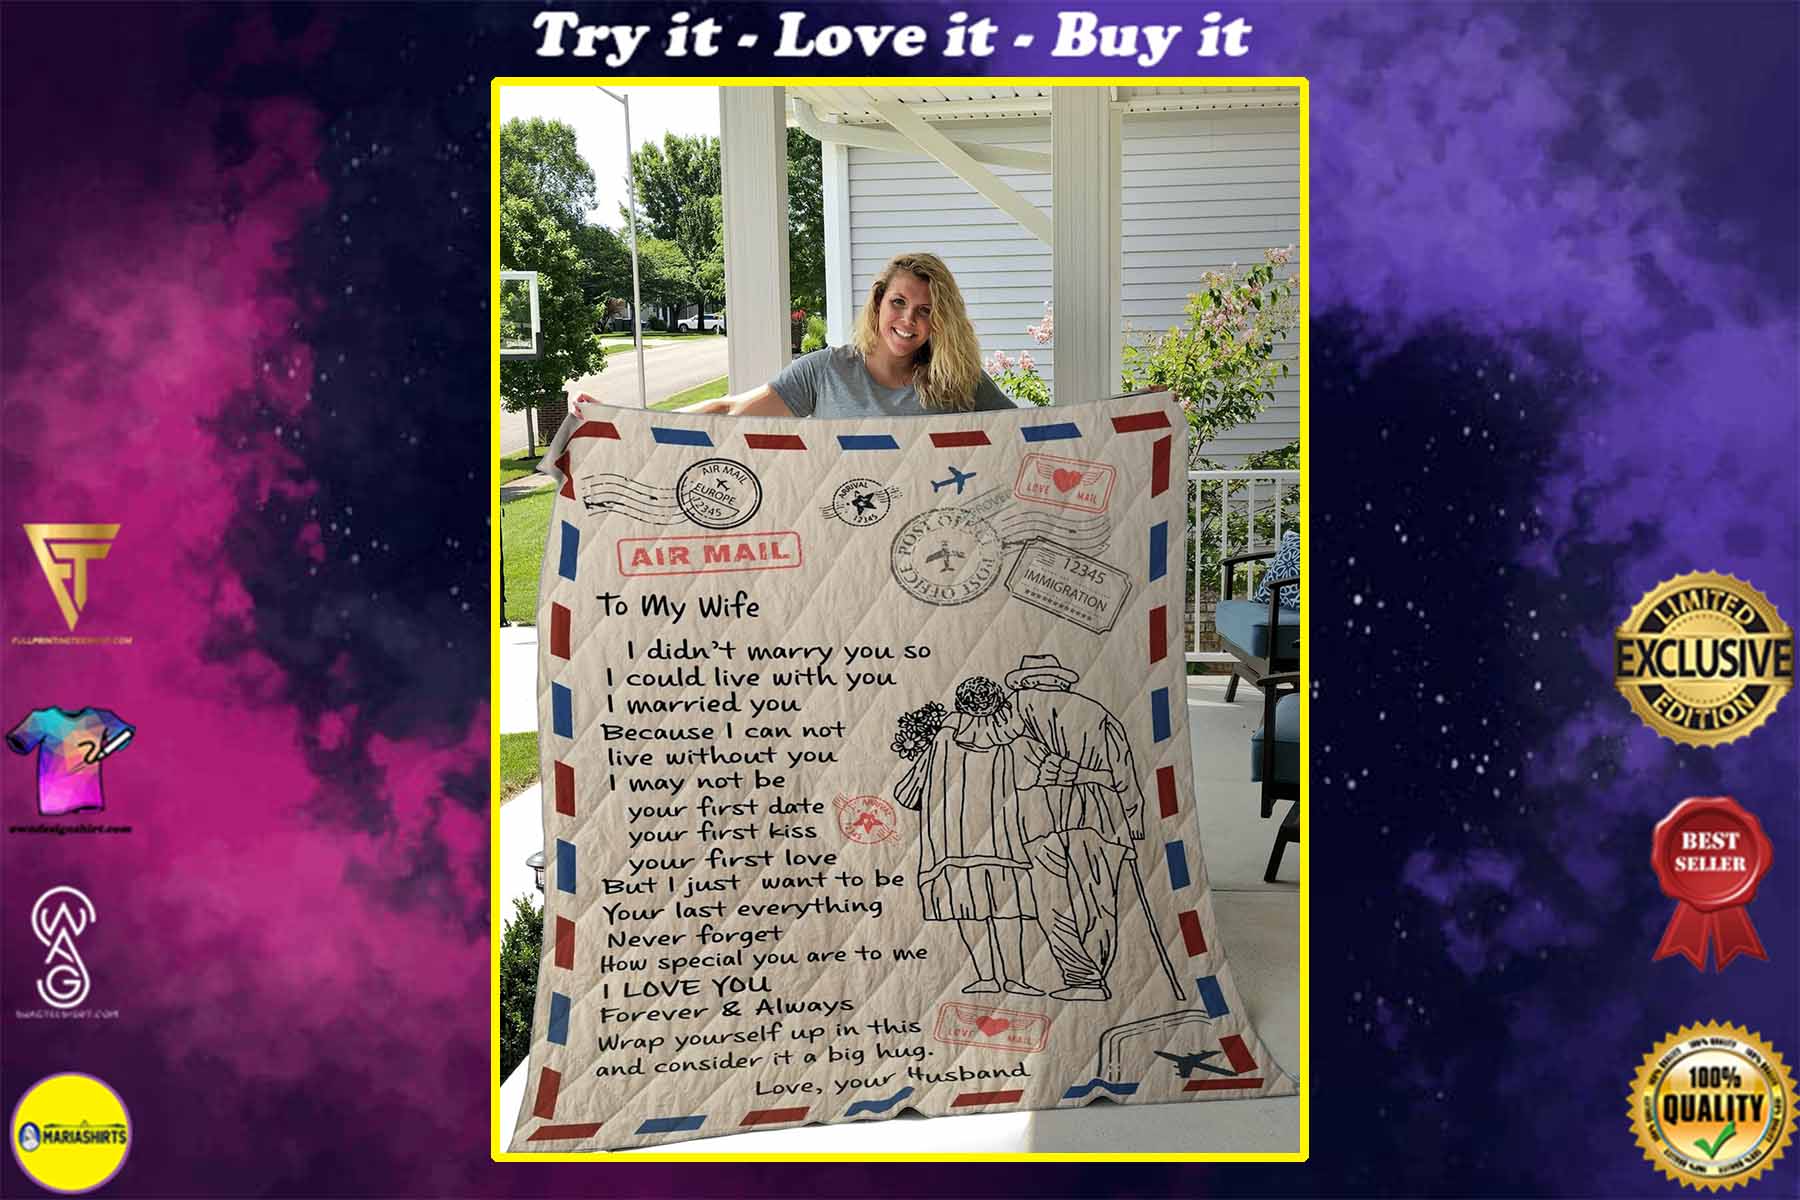 air mail letter to my wife i love you forever and always your husband quilt